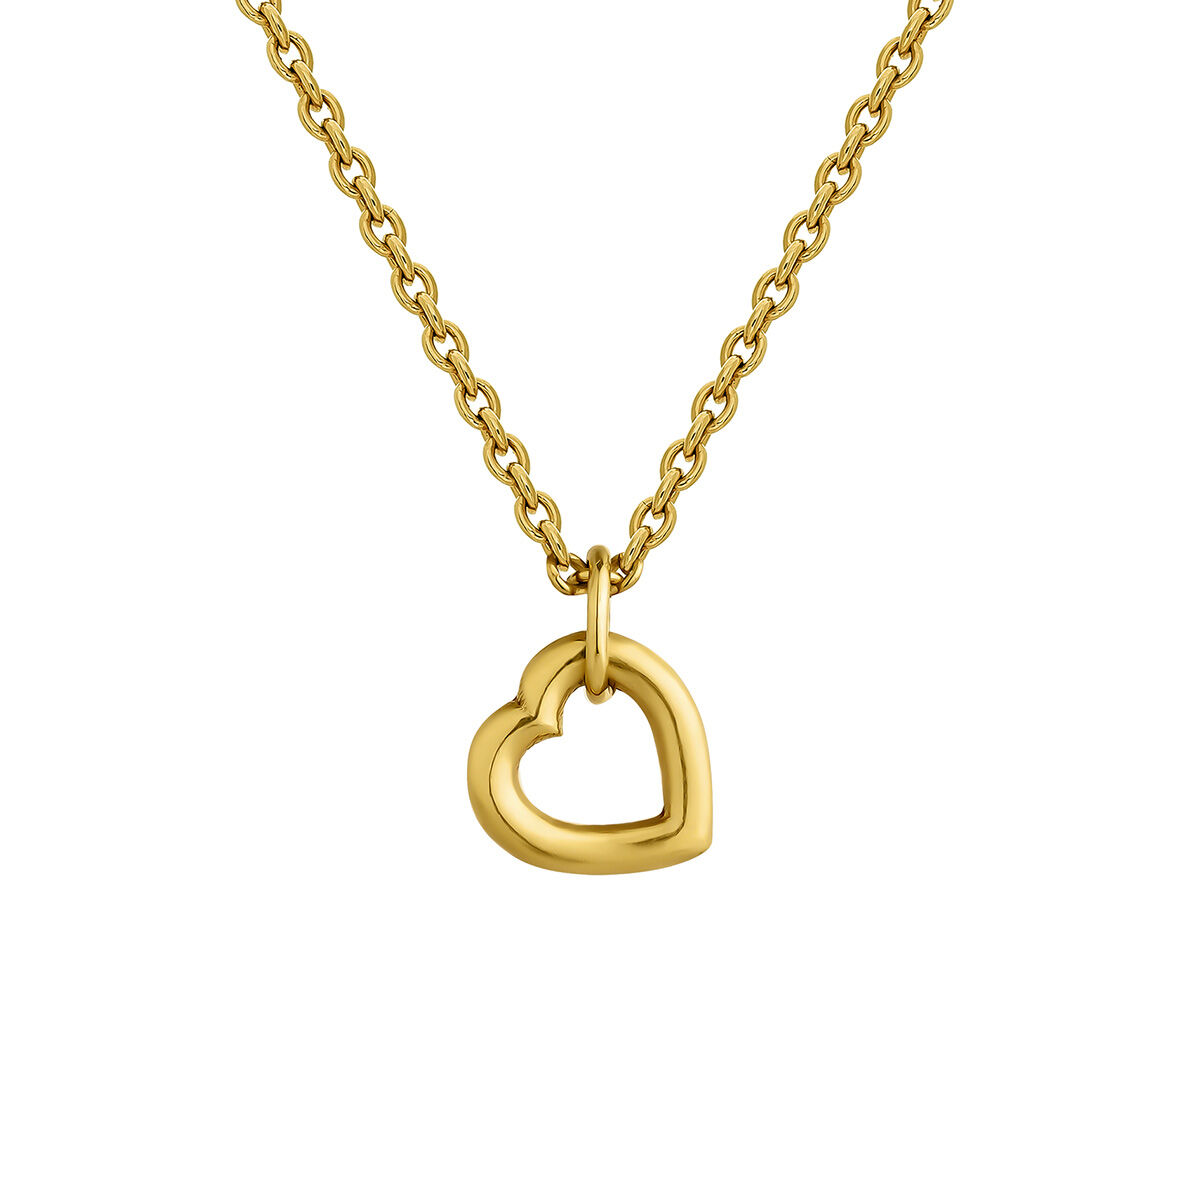 Heart pendant in 18k yellow gold-plated silver with red enamel, J05162-02-ROJENA, hi-res